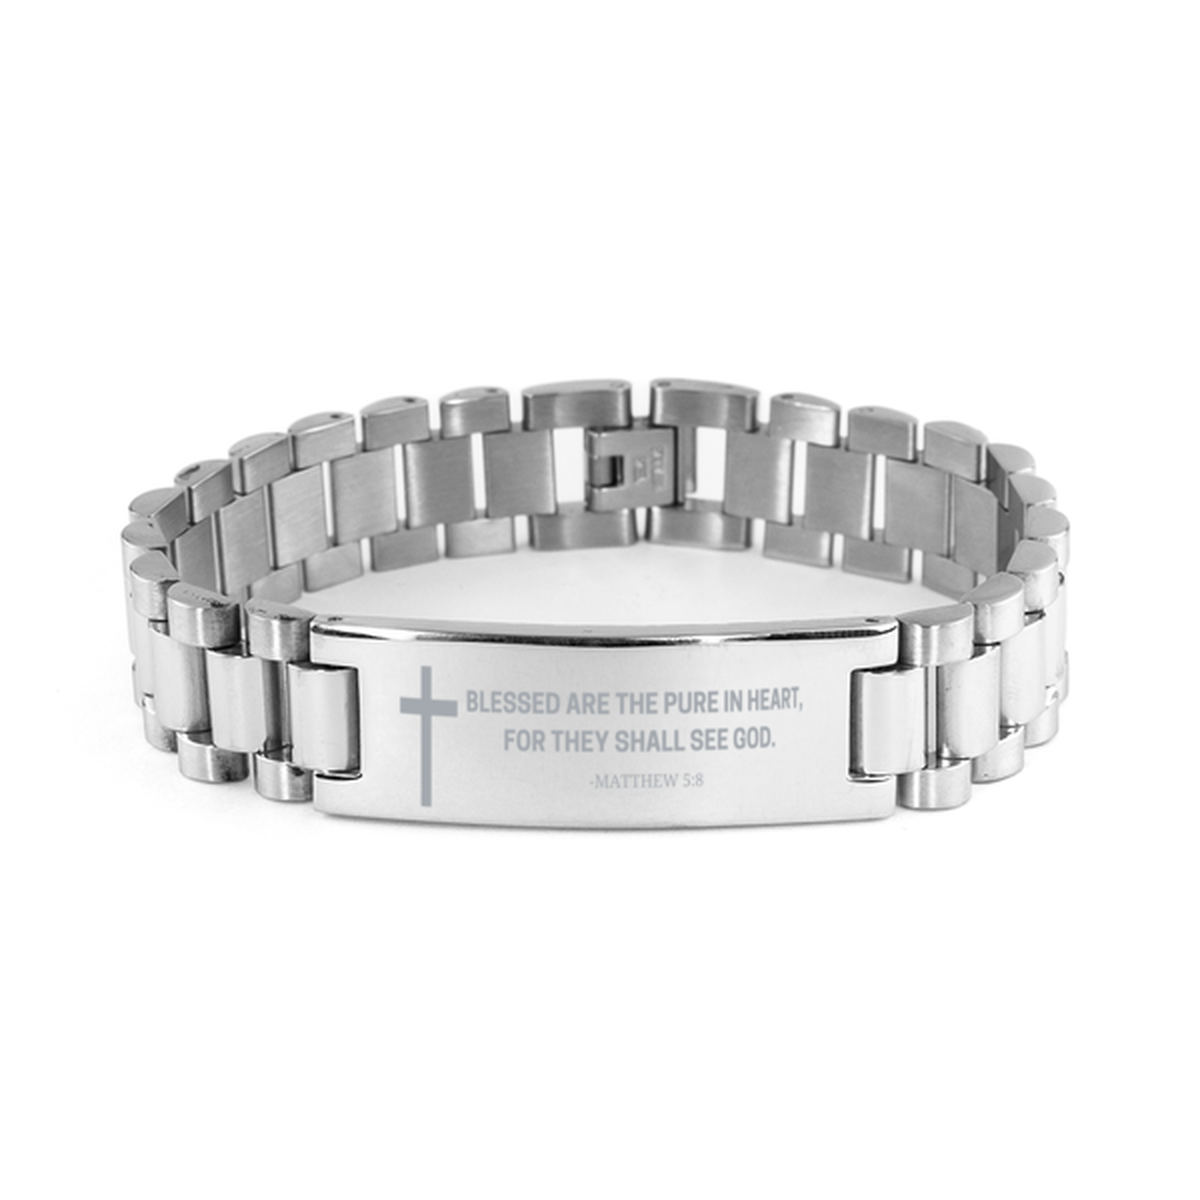 Baptism Gifts For Teenage Boys Girls, Christian Bible Verse Ladder Stainless Steel Bracelet, Blessed are the pure in heart, Catholic Confirmation Gifts for Son, Godson, Grandson, Nephew